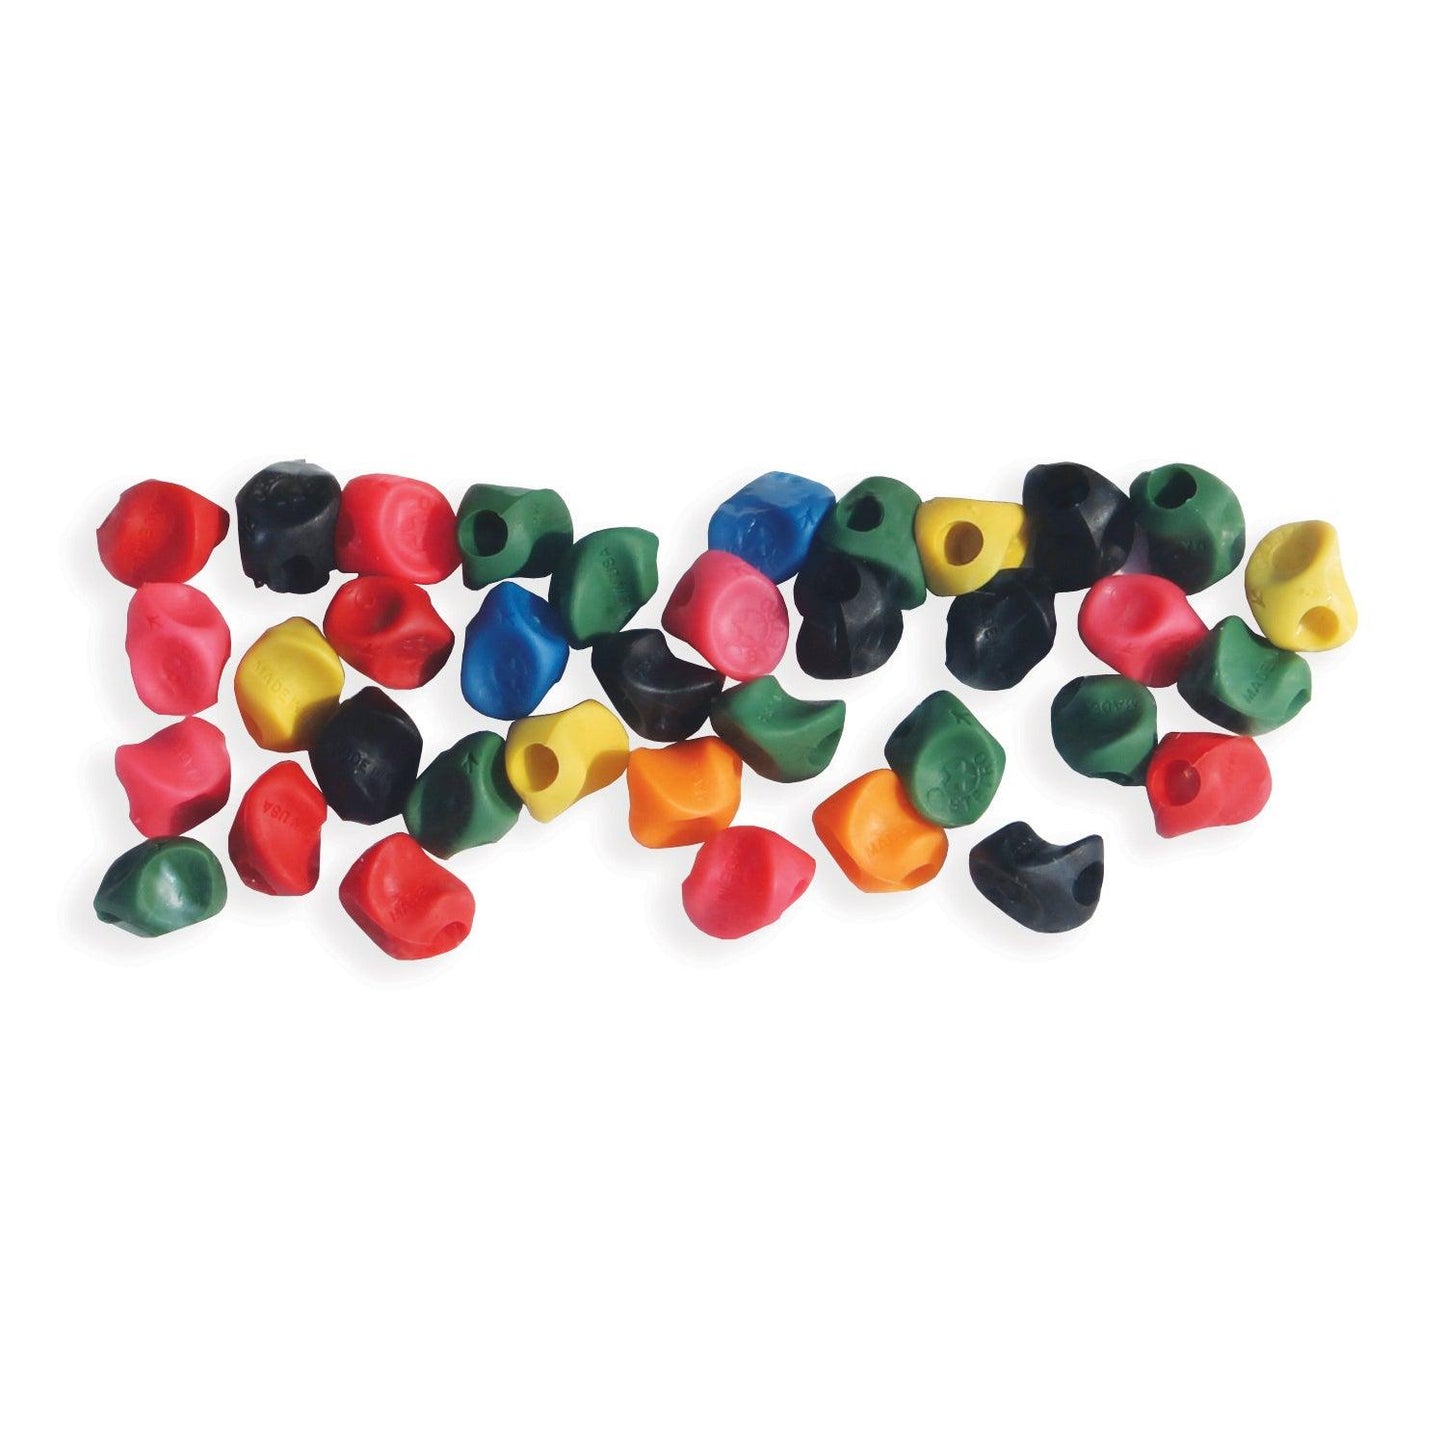 Stetro® Pencil Grips, Pack of 144 - Loomini